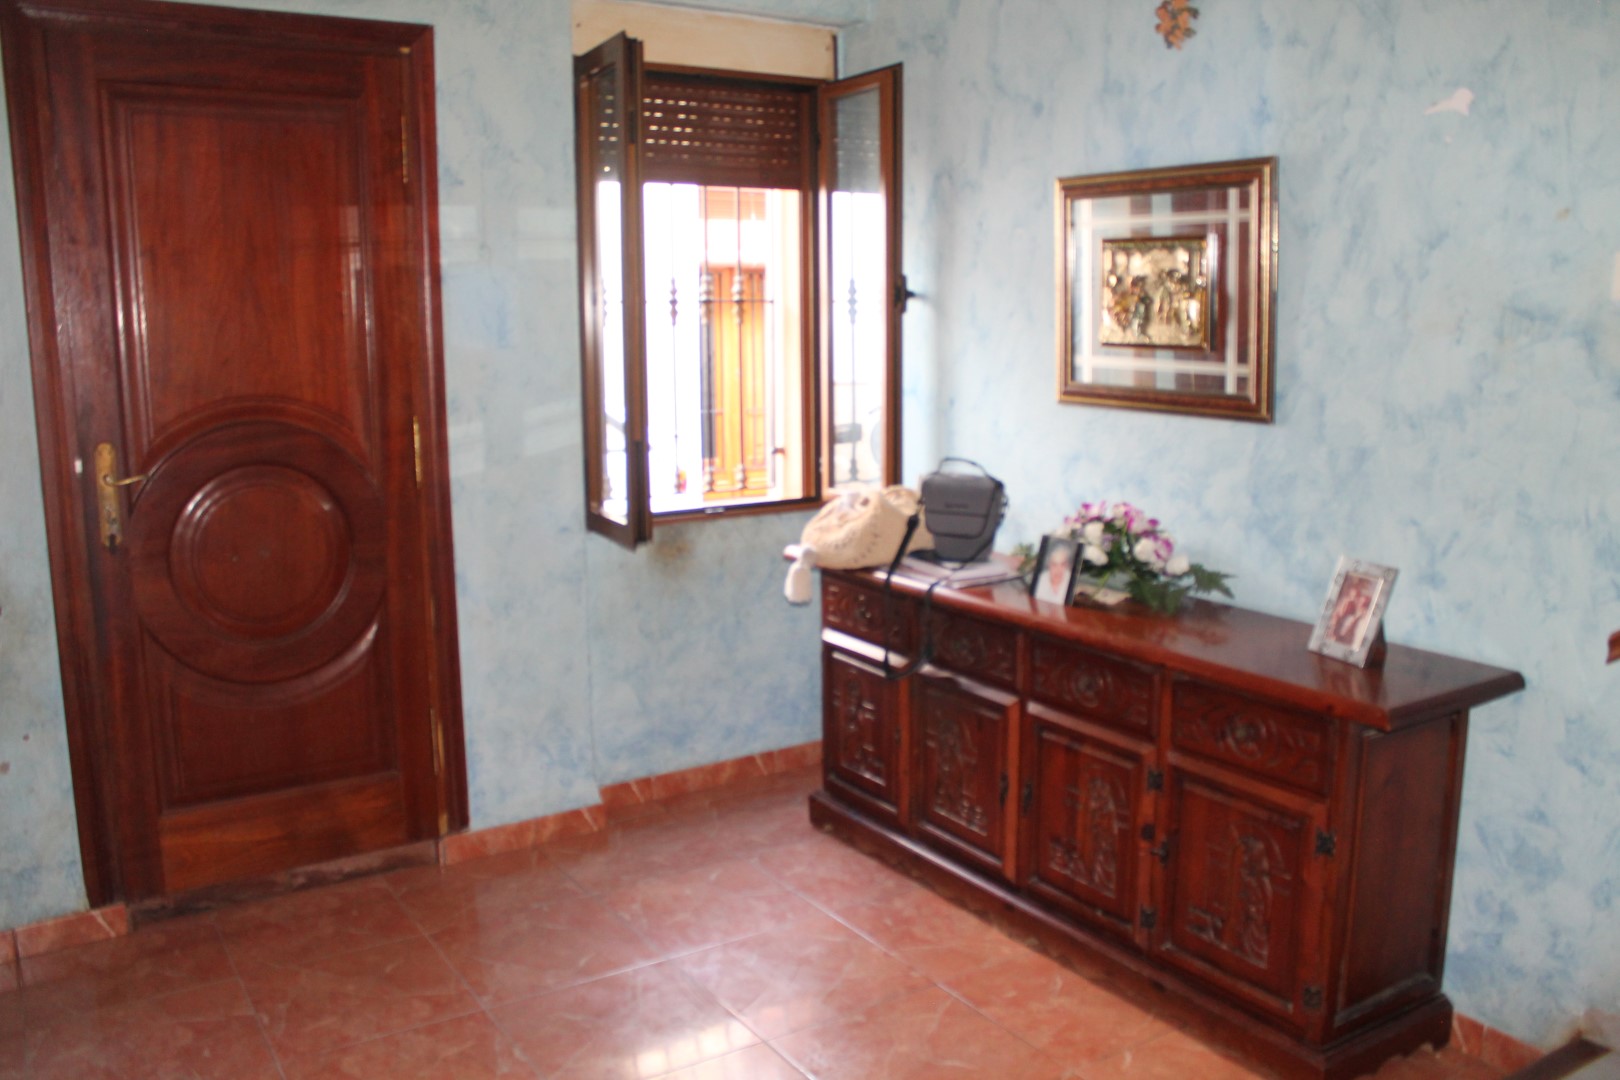 Sale of town house in Pedreguer